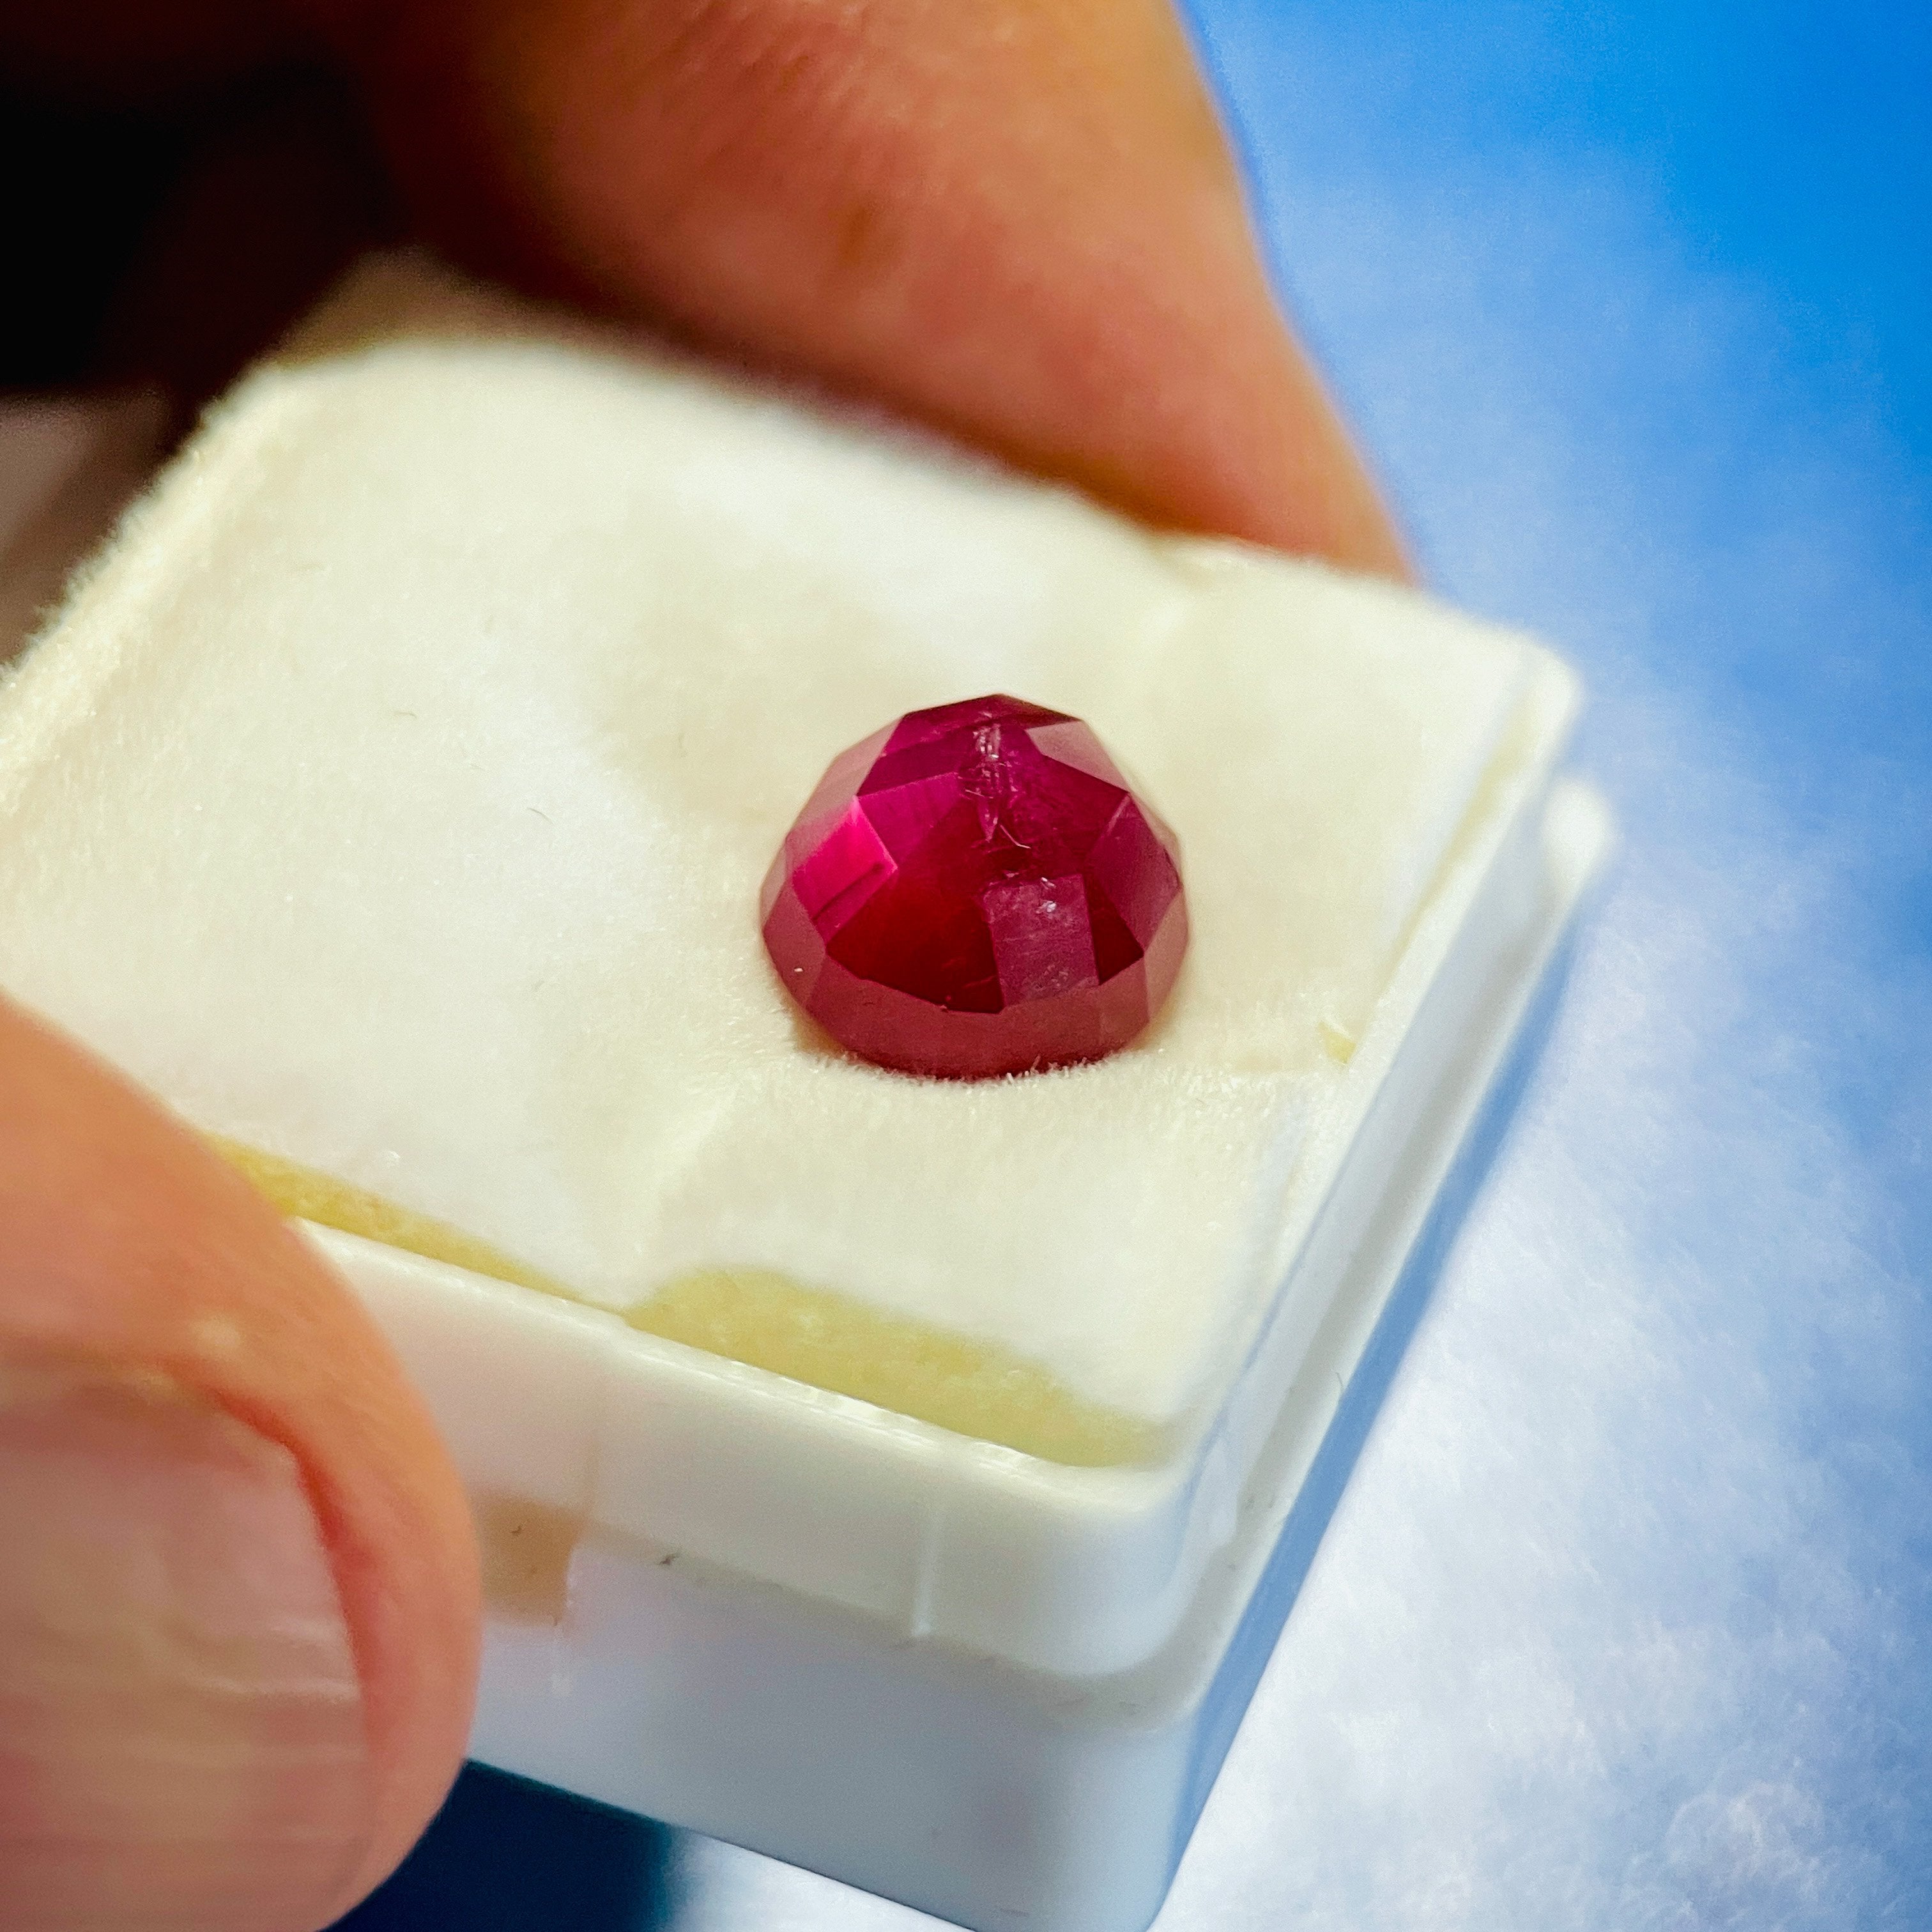 4.16Ct Ruby Faceted Cabochon/ Rose Cut Tanzania Untreated Unheated